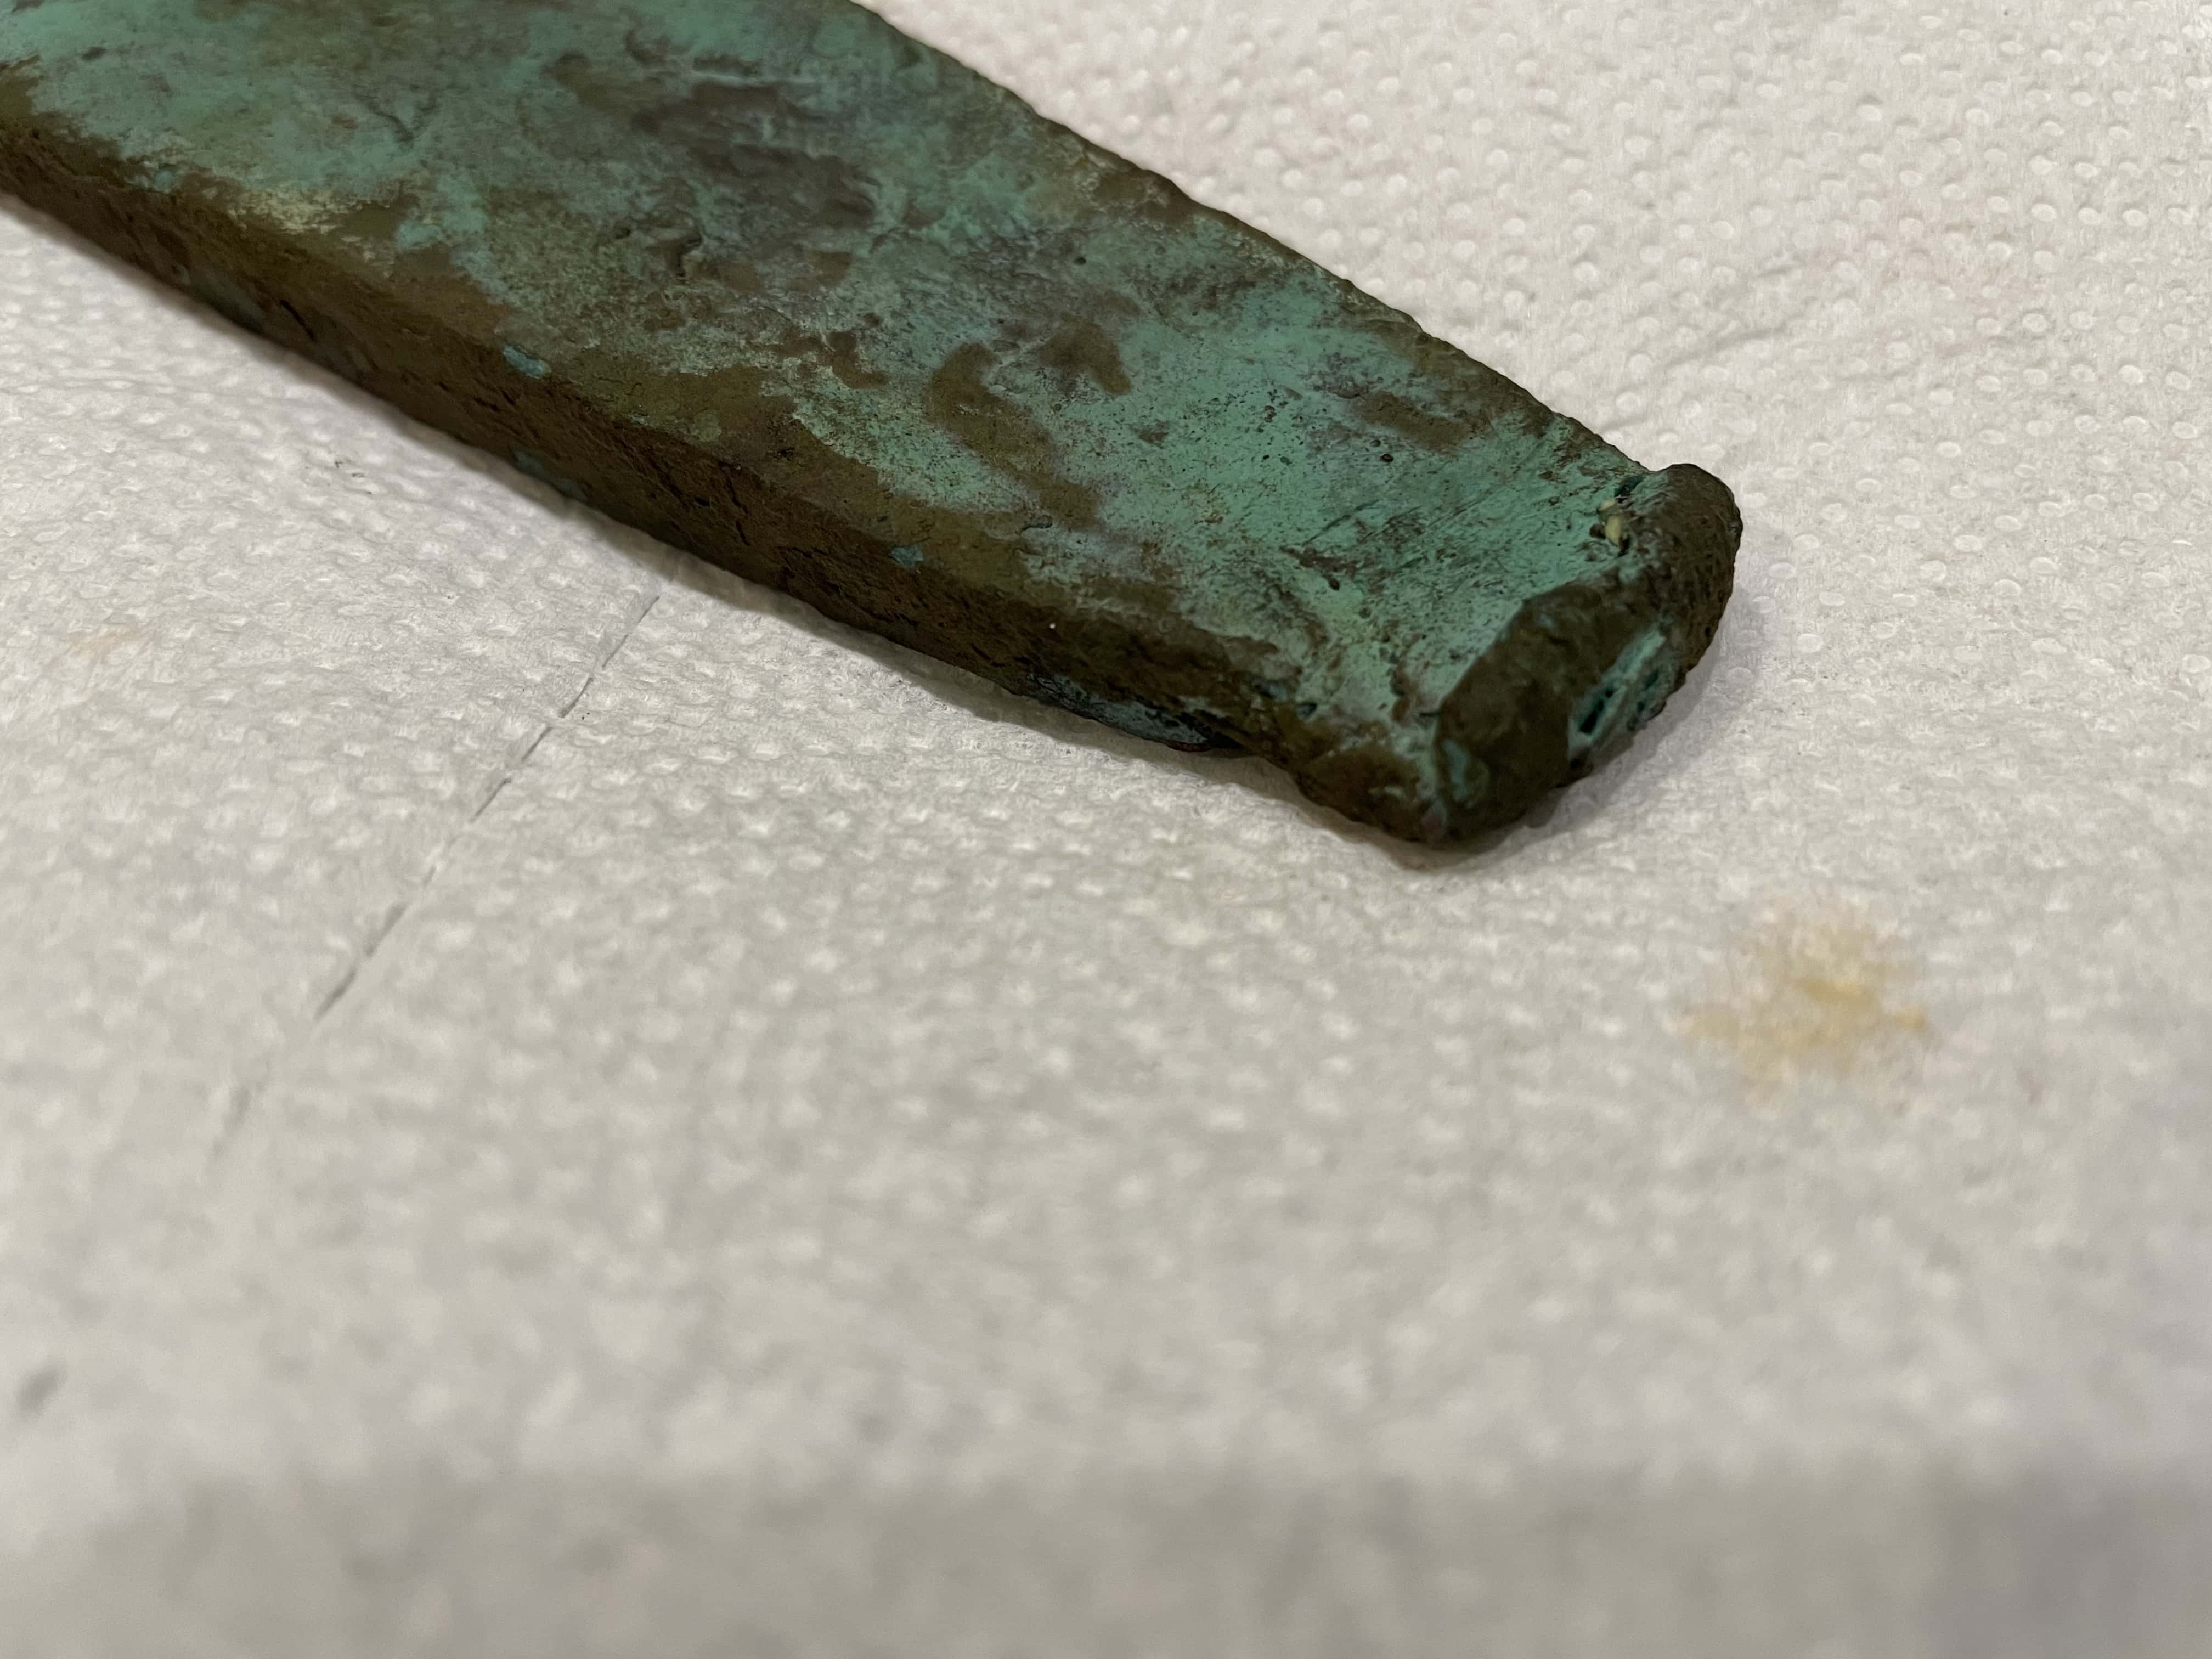 Prehistoric Copper Implement with Green Patina Across Surface Showing End Edge Resting On Paper Towel in Background